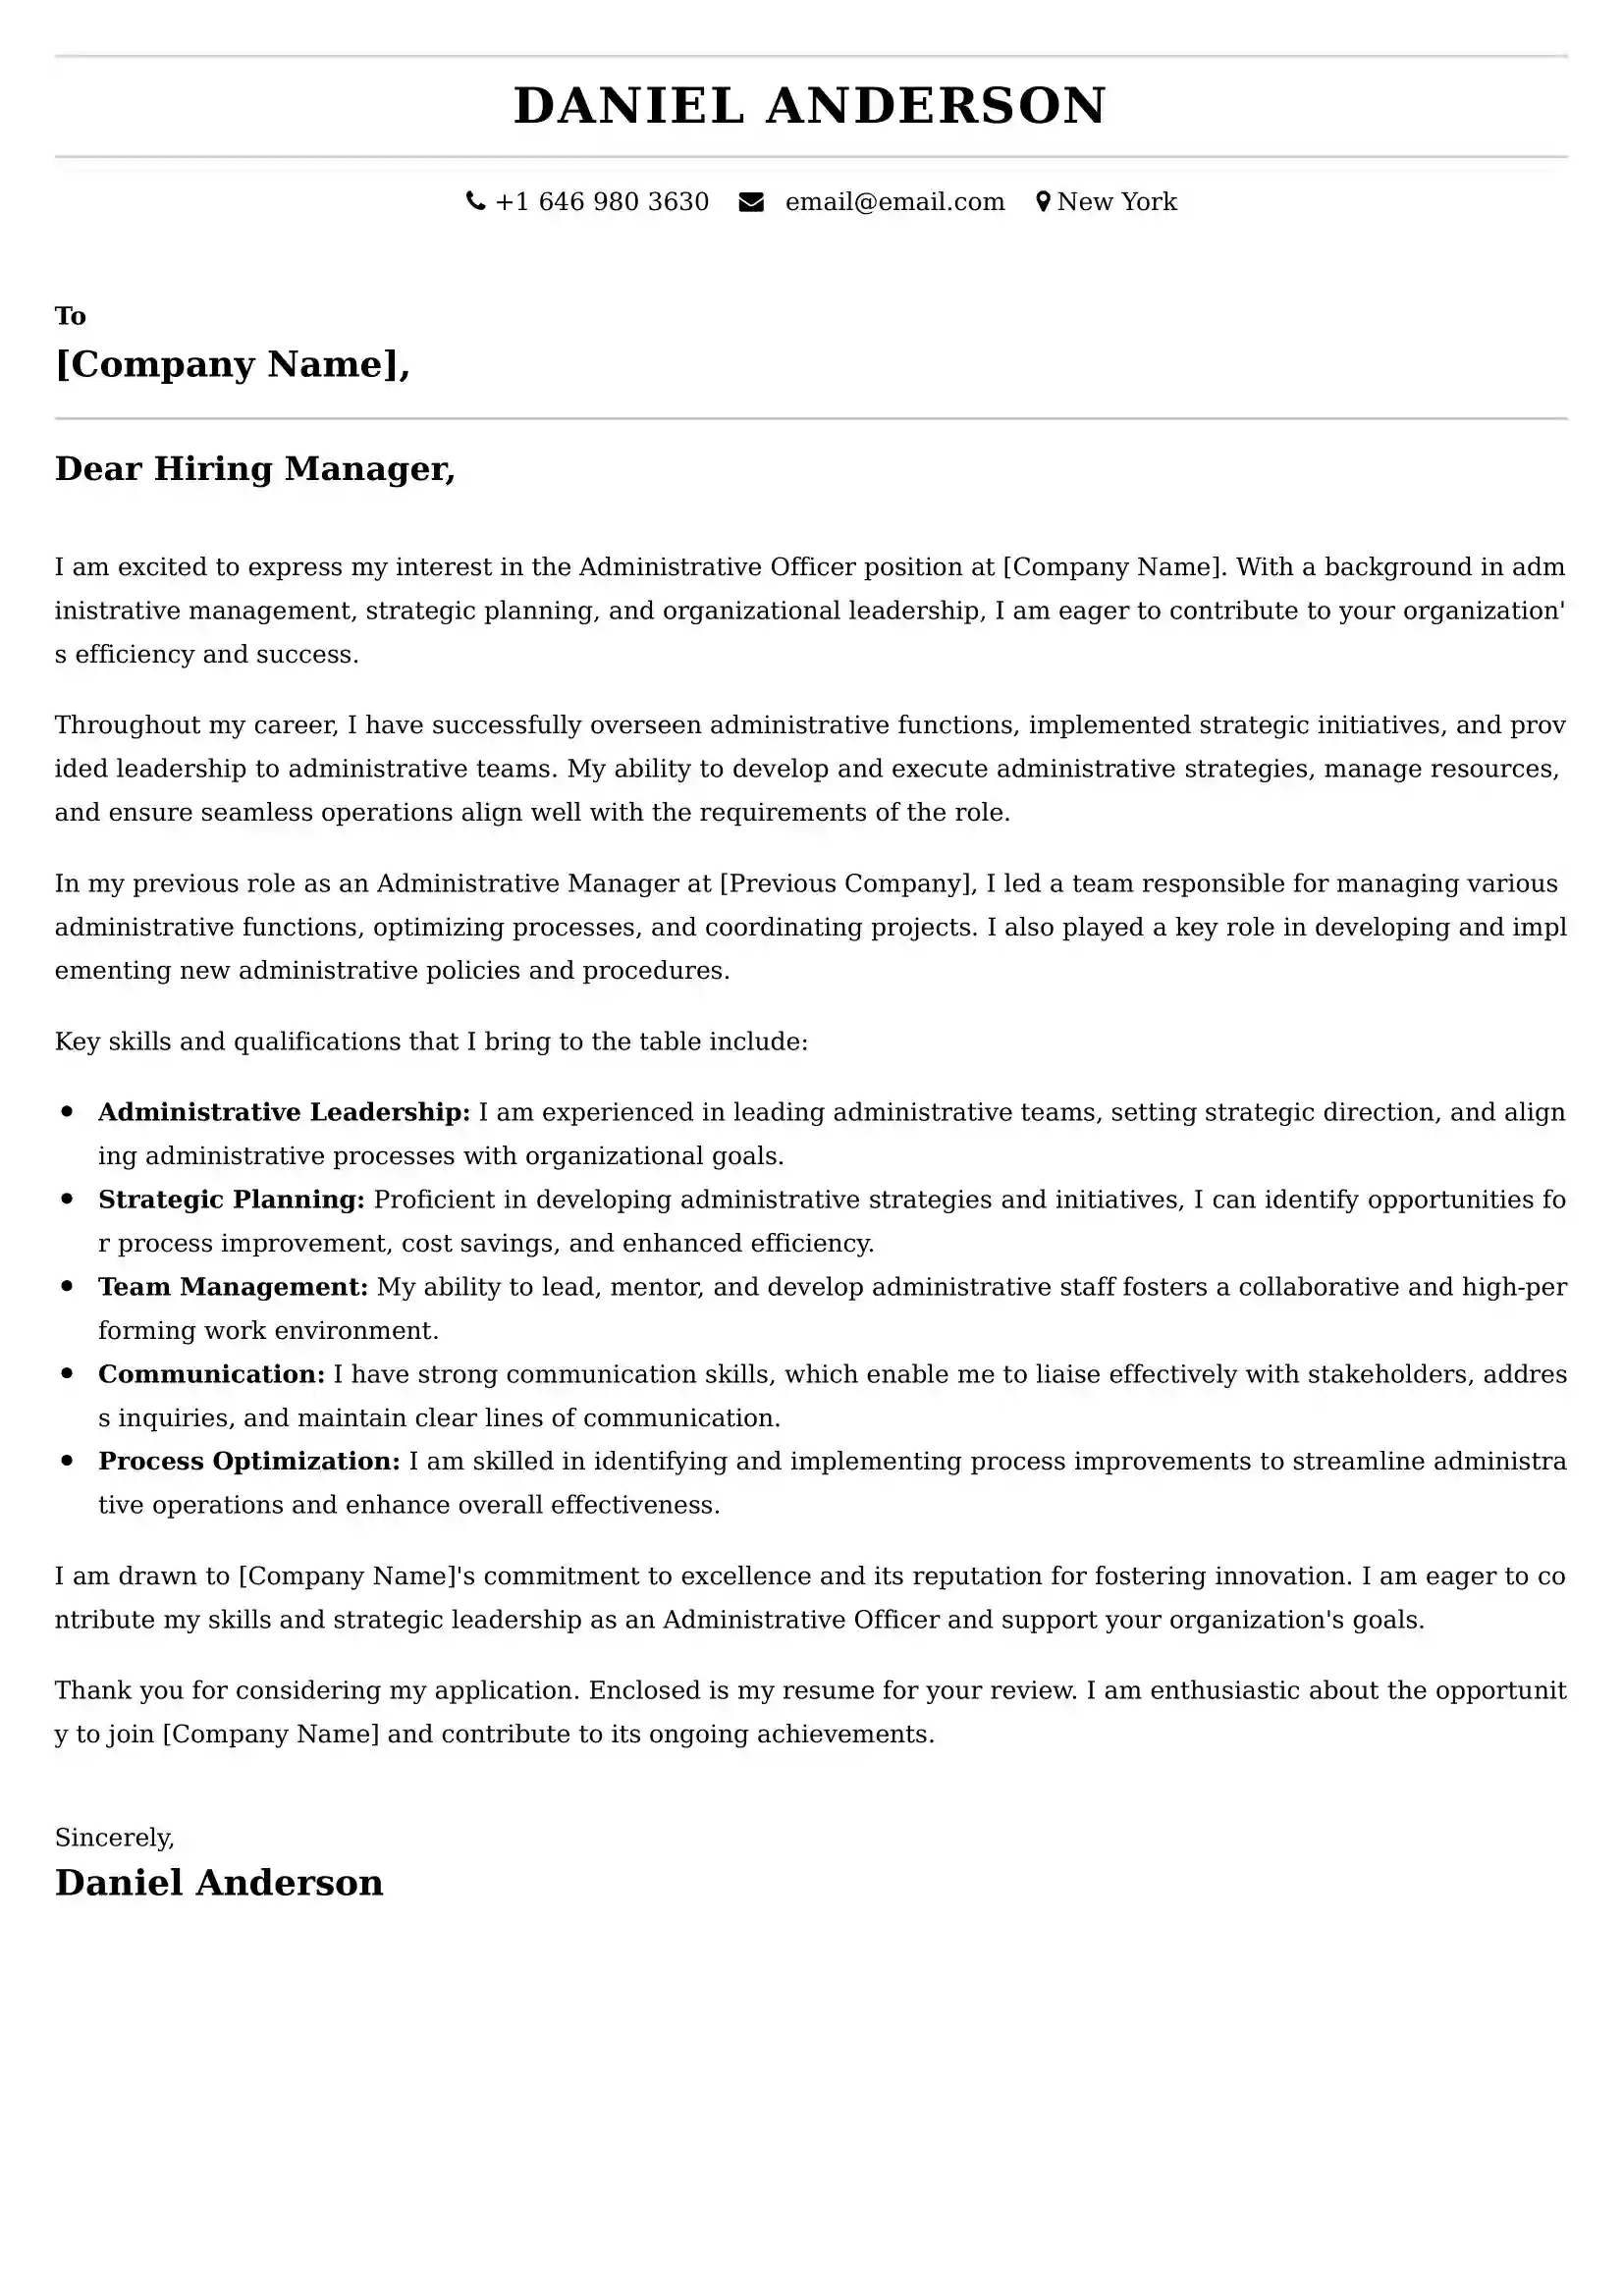 Administrative Officer Cover Letter Examples Australia